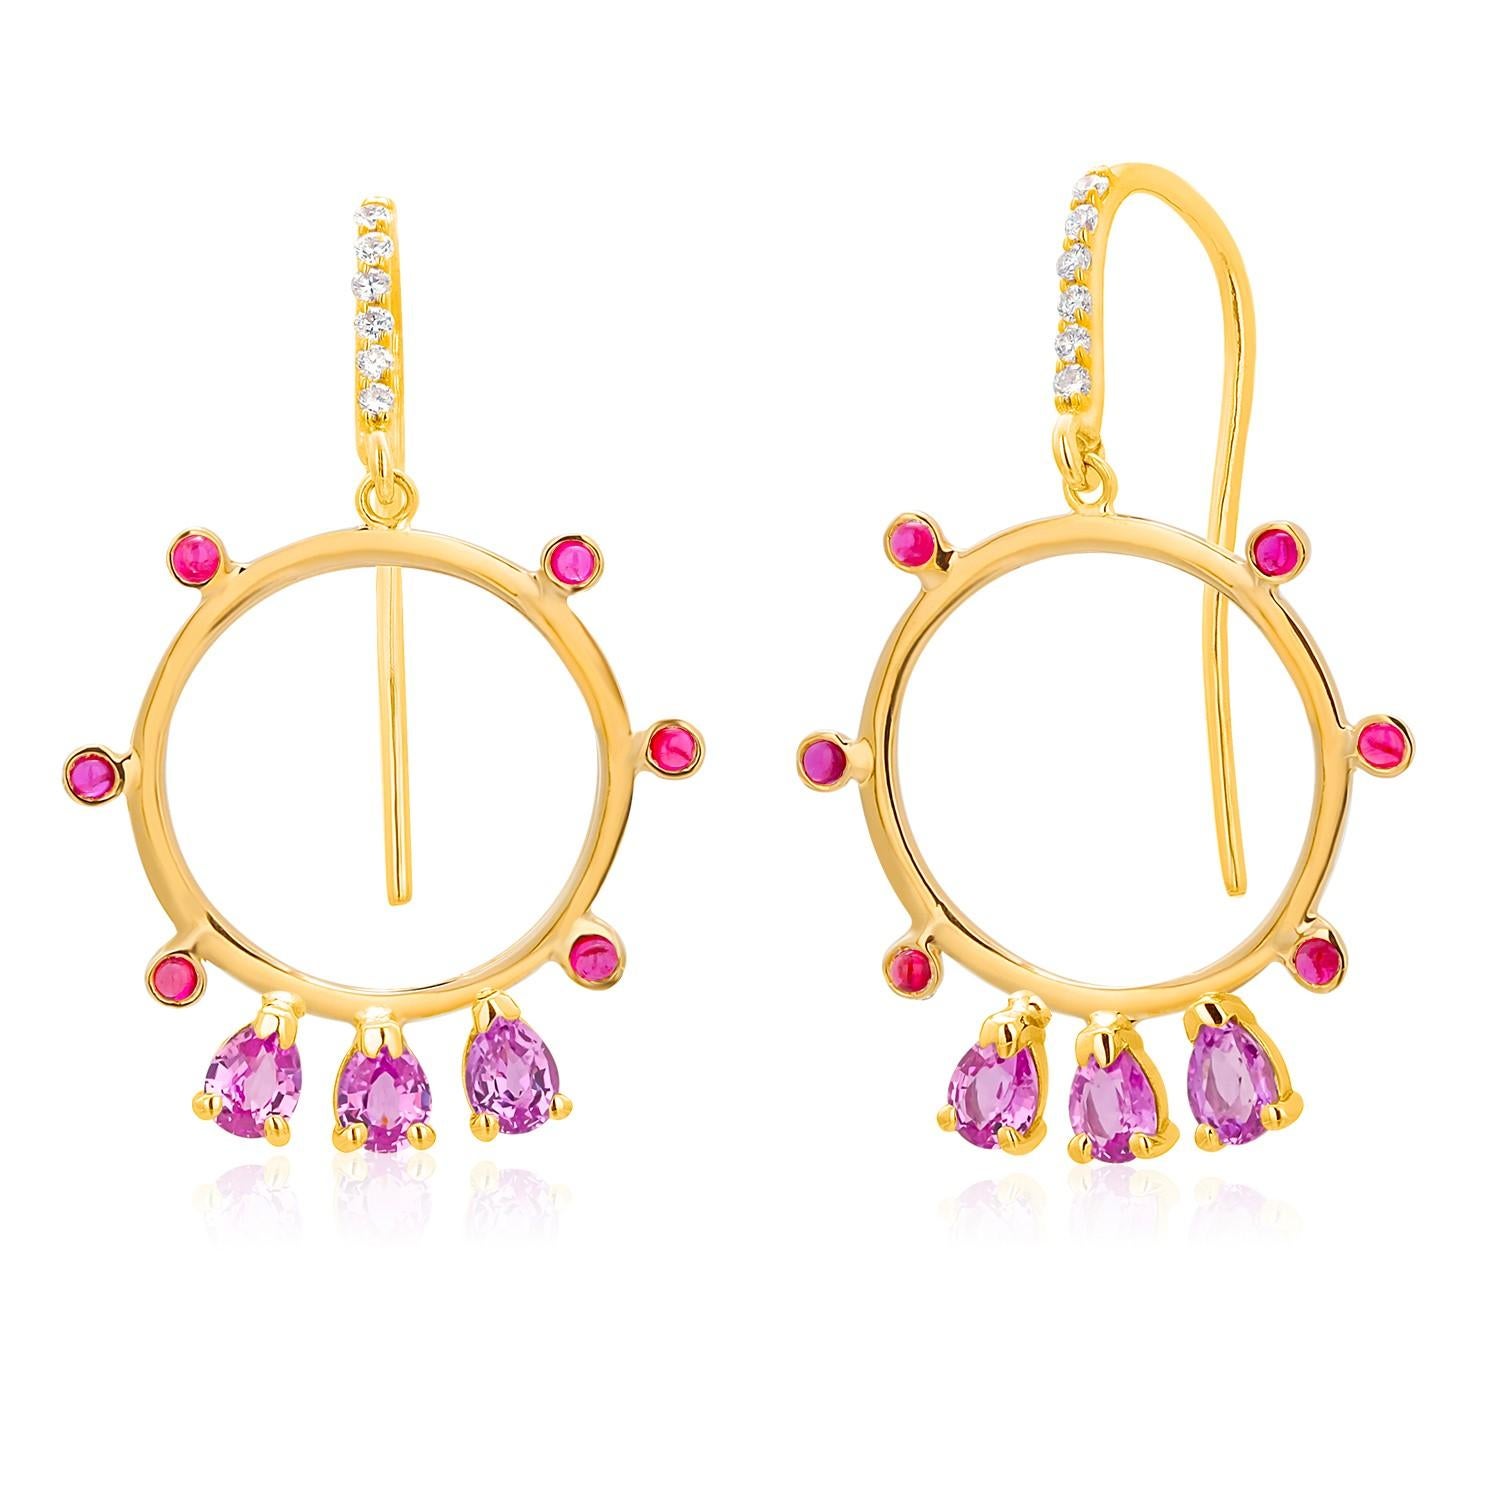 This exquisite pair of earrings is crafted in 14-karat yellow gold, designed to add a touch of luxury to any ensemble. Each earring features a meticulously arranged cluster of six pear-shaped Ceylon pink sapphires, collectively weighing 1.68 carats,